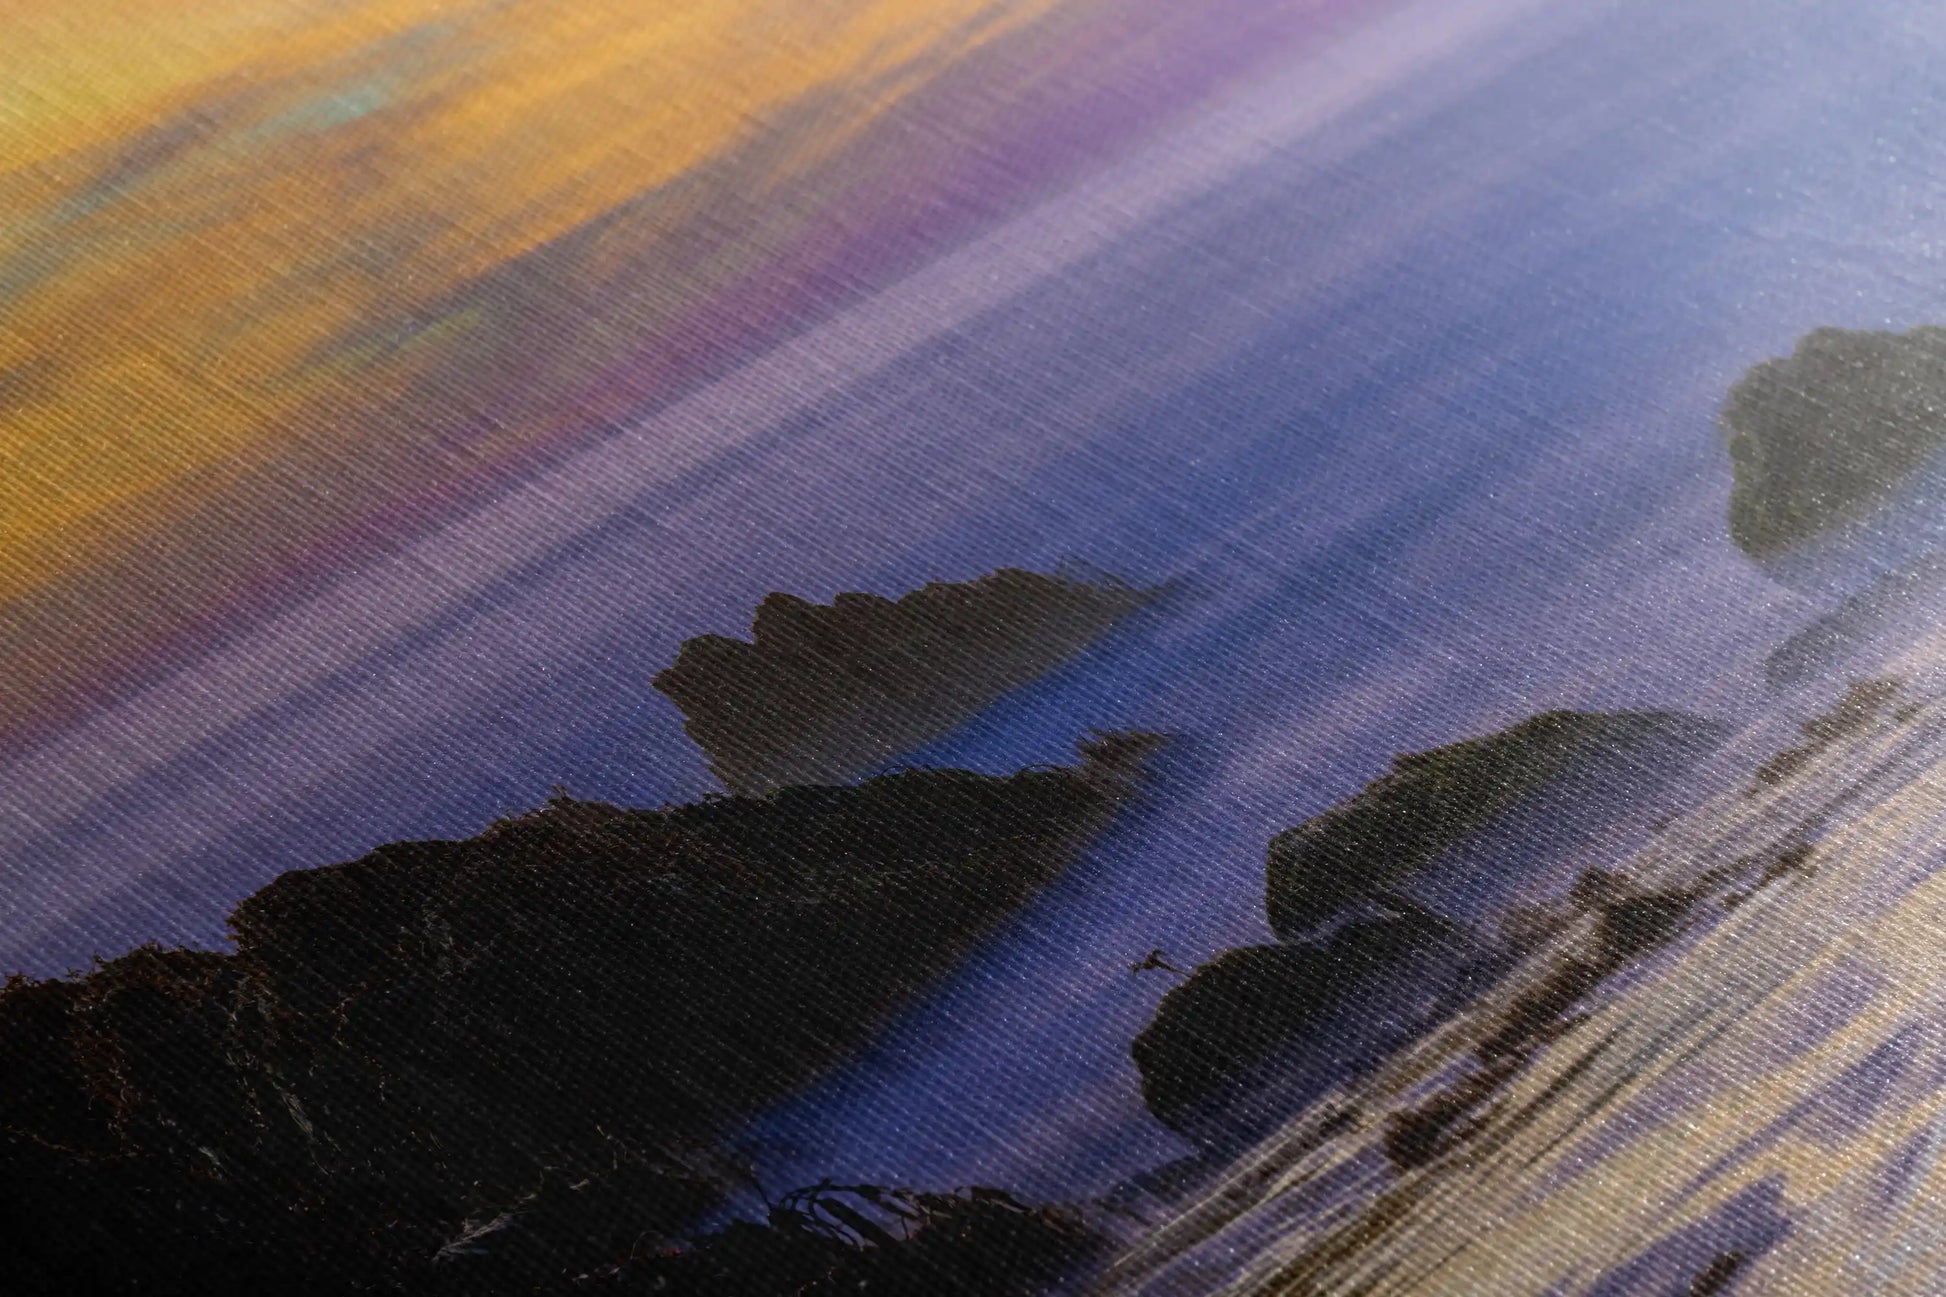 Textured detail of canvas showing the purple hues of the sunset on Big Sur's Purple Sand Beach, emphasizing the fine artistry.